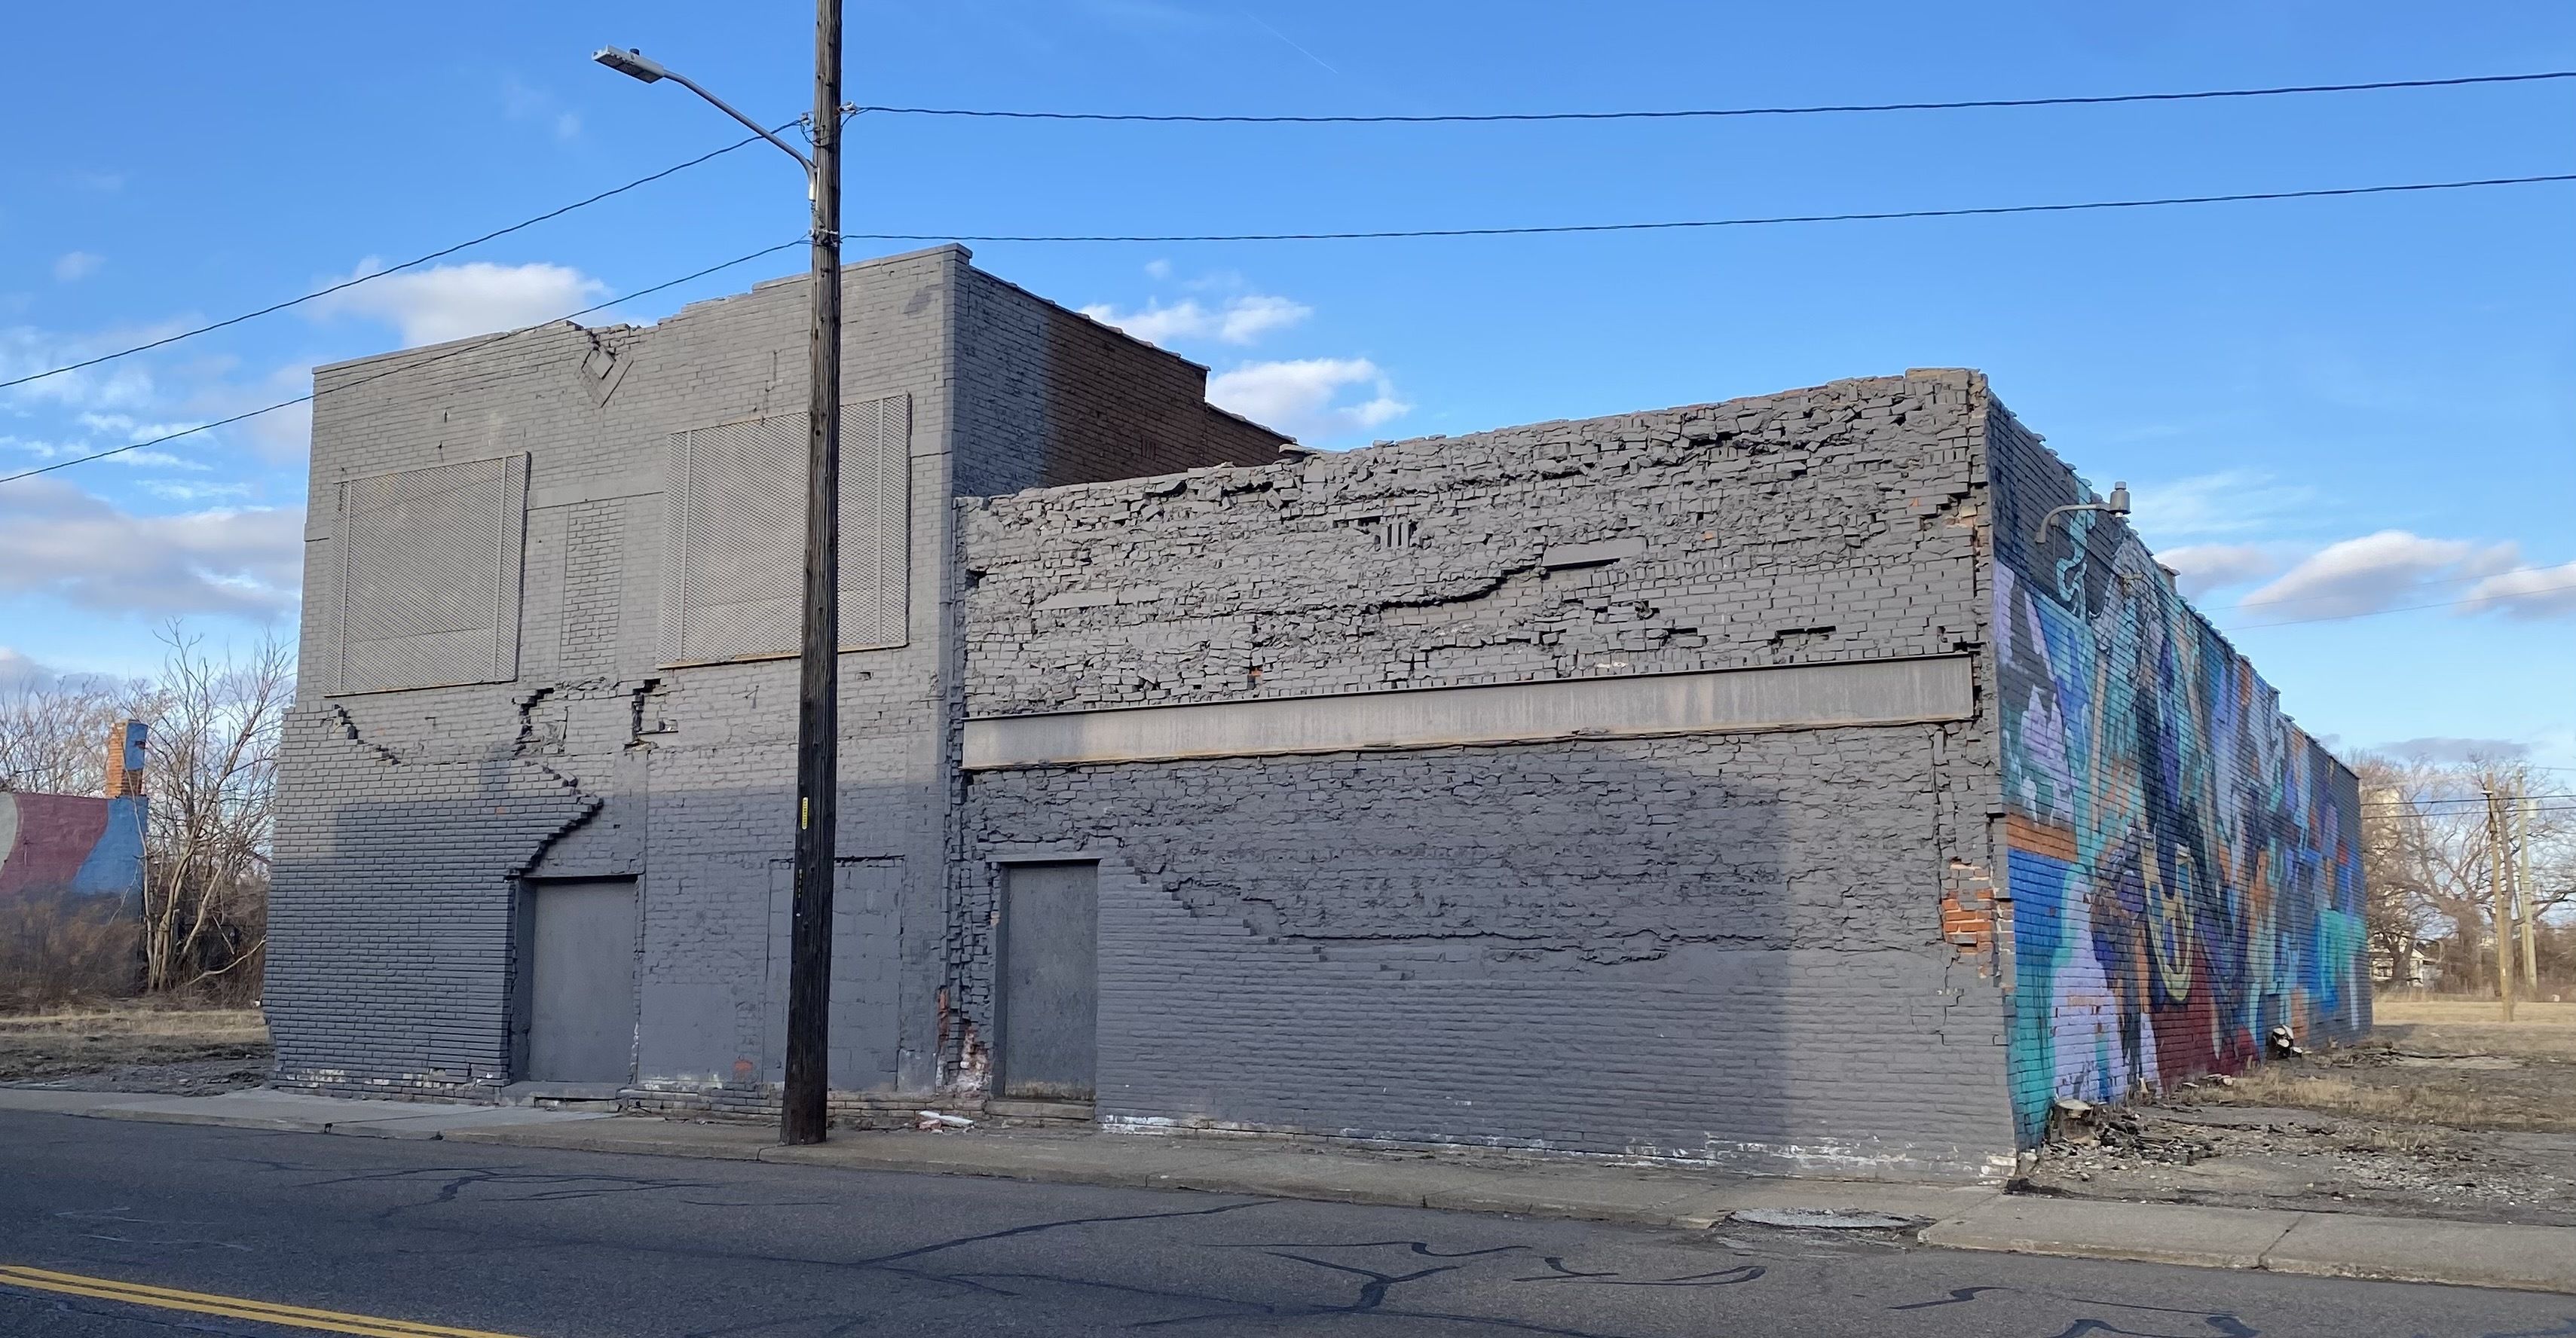 A vacant building that's grey on the front with a mural on the side.